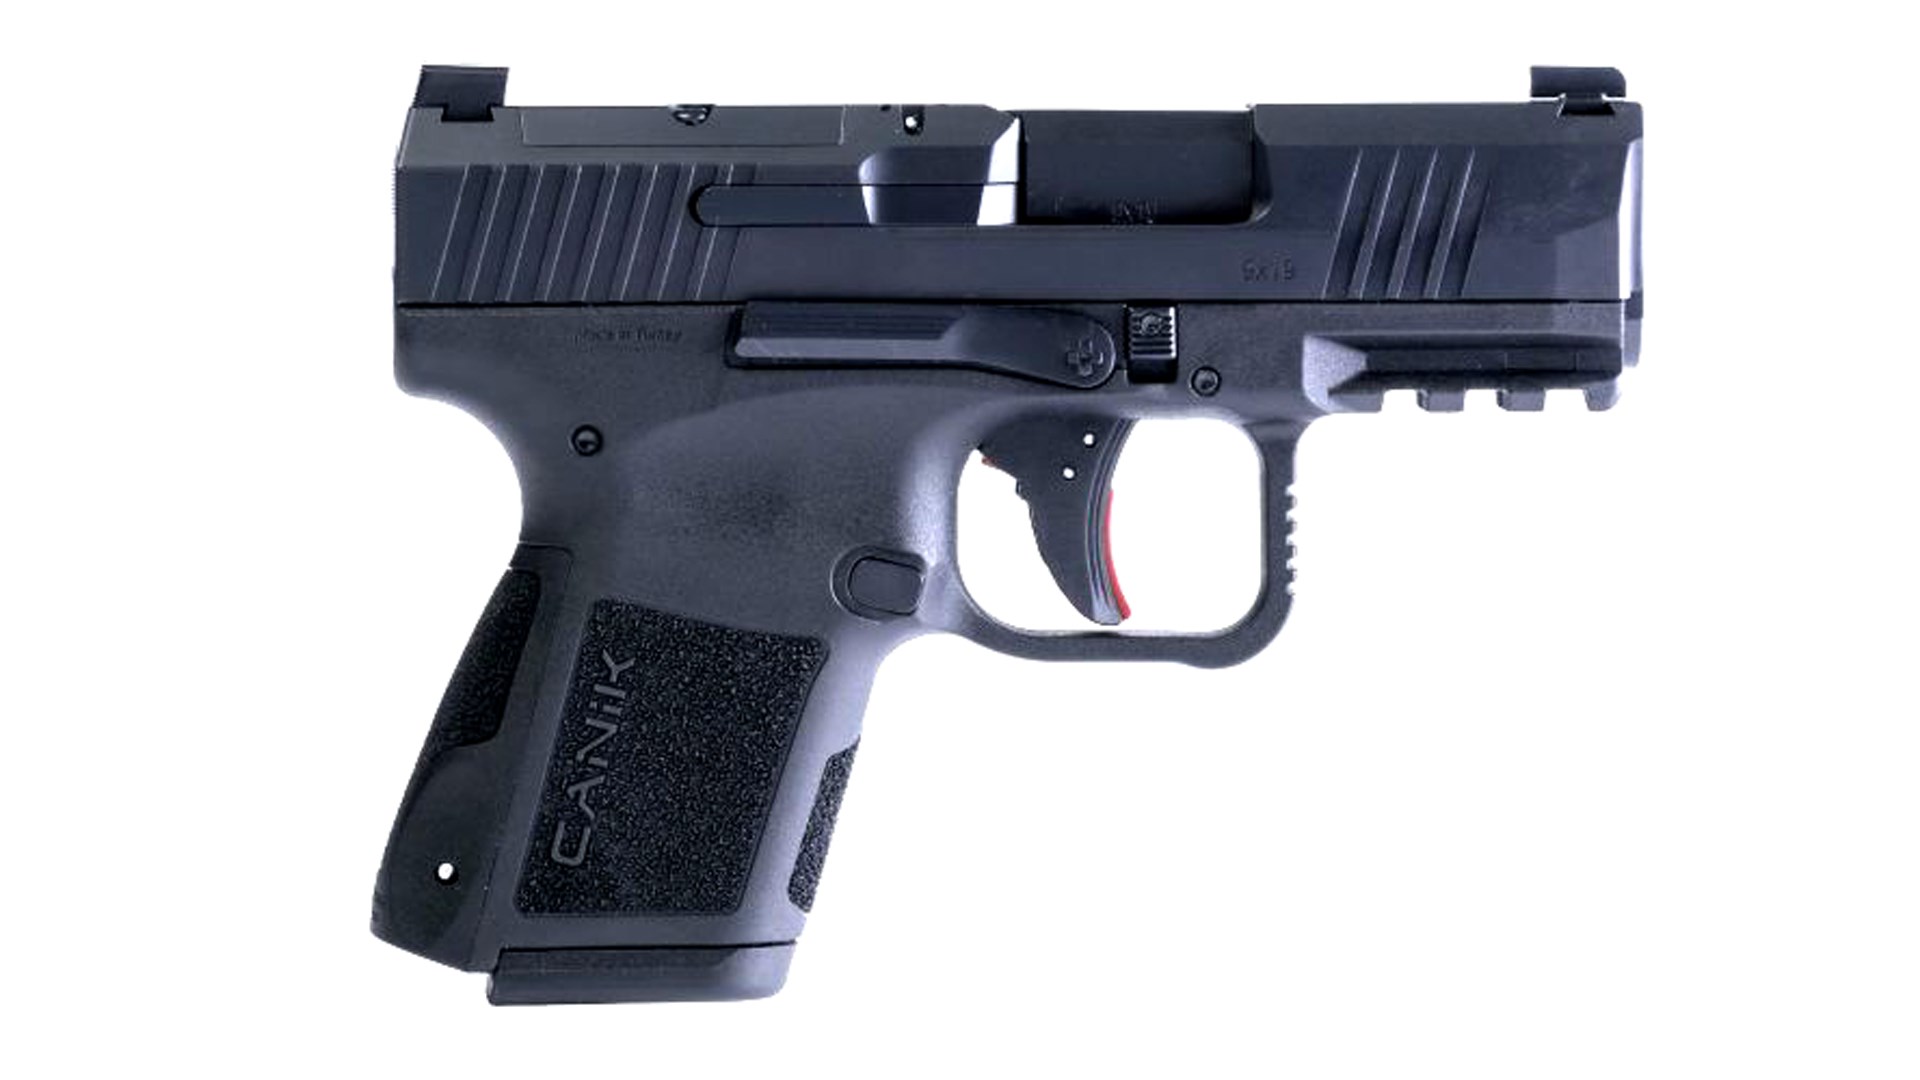 Right side of the all-black Canik Mete MC9 concealed-carry pistol.